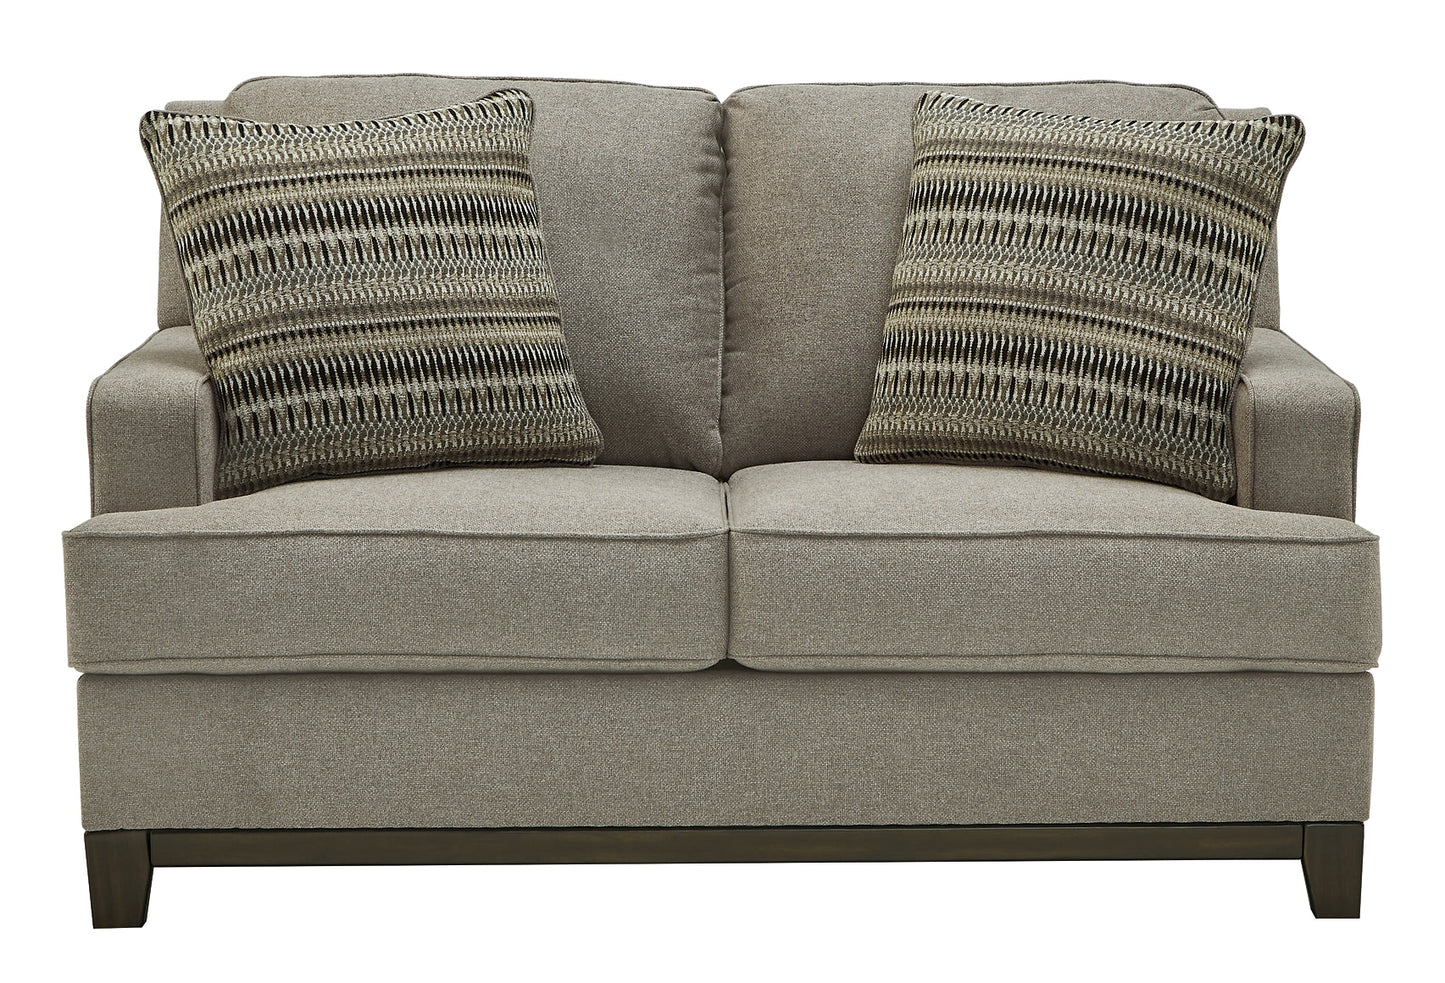 Kaywood Sofa, Loveseat, Chair and Ottoman at Walker Mattress and Furniture Locations in Cedar Park and Belton TX.